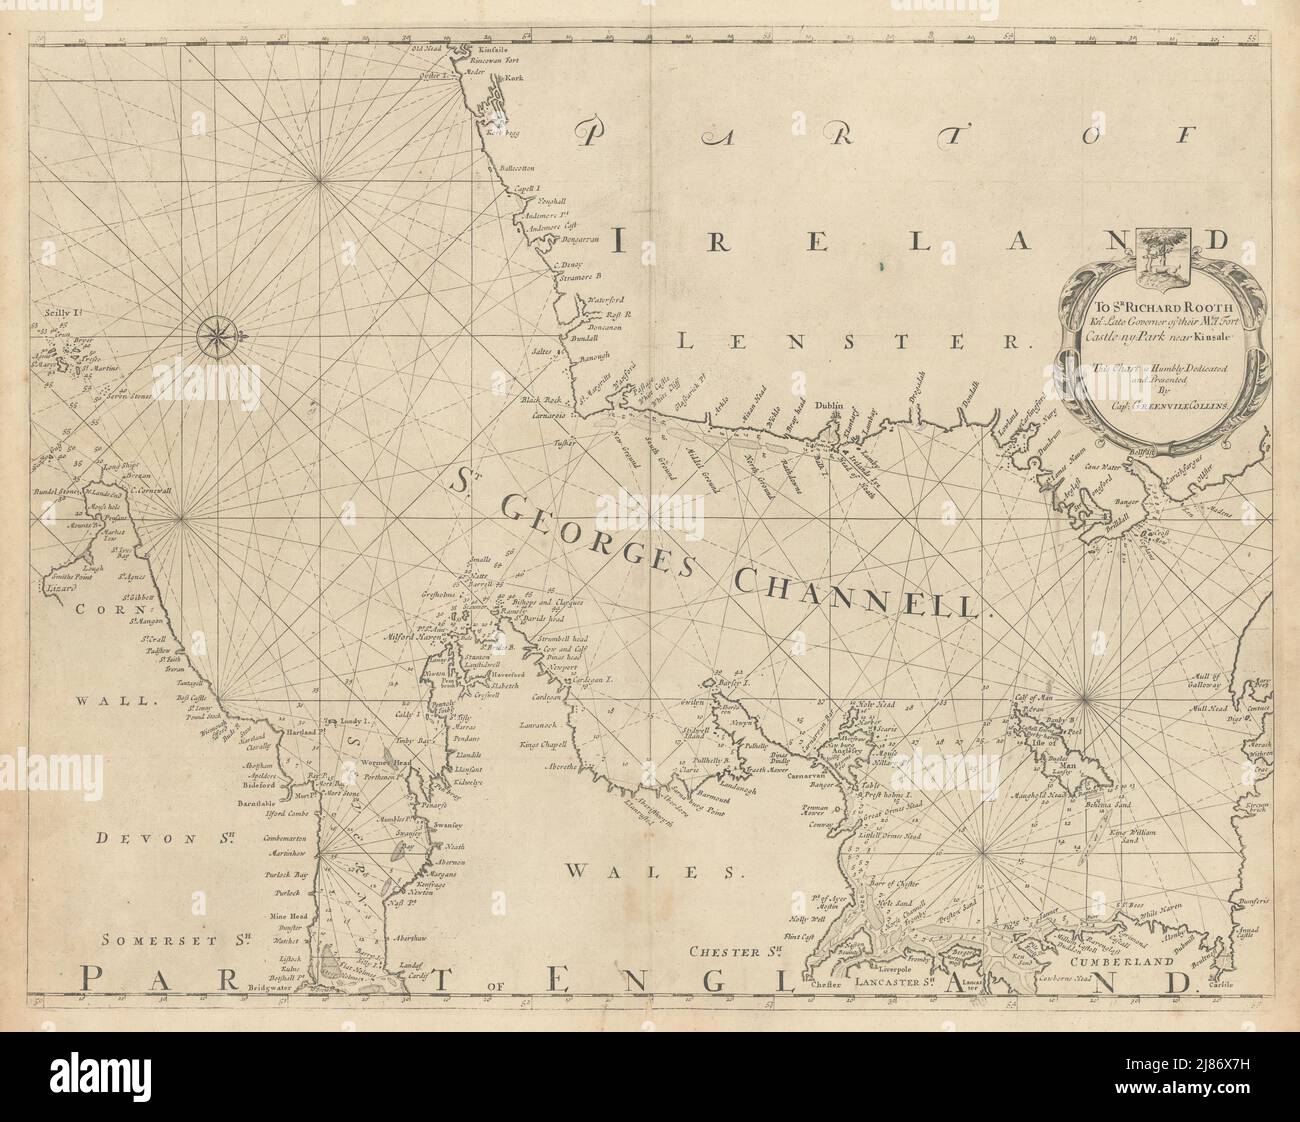 ST GEORGE'S CHANNELL sea chart. The Irish & Celtic Seas. COLLINS 1723 old map Stock Photo